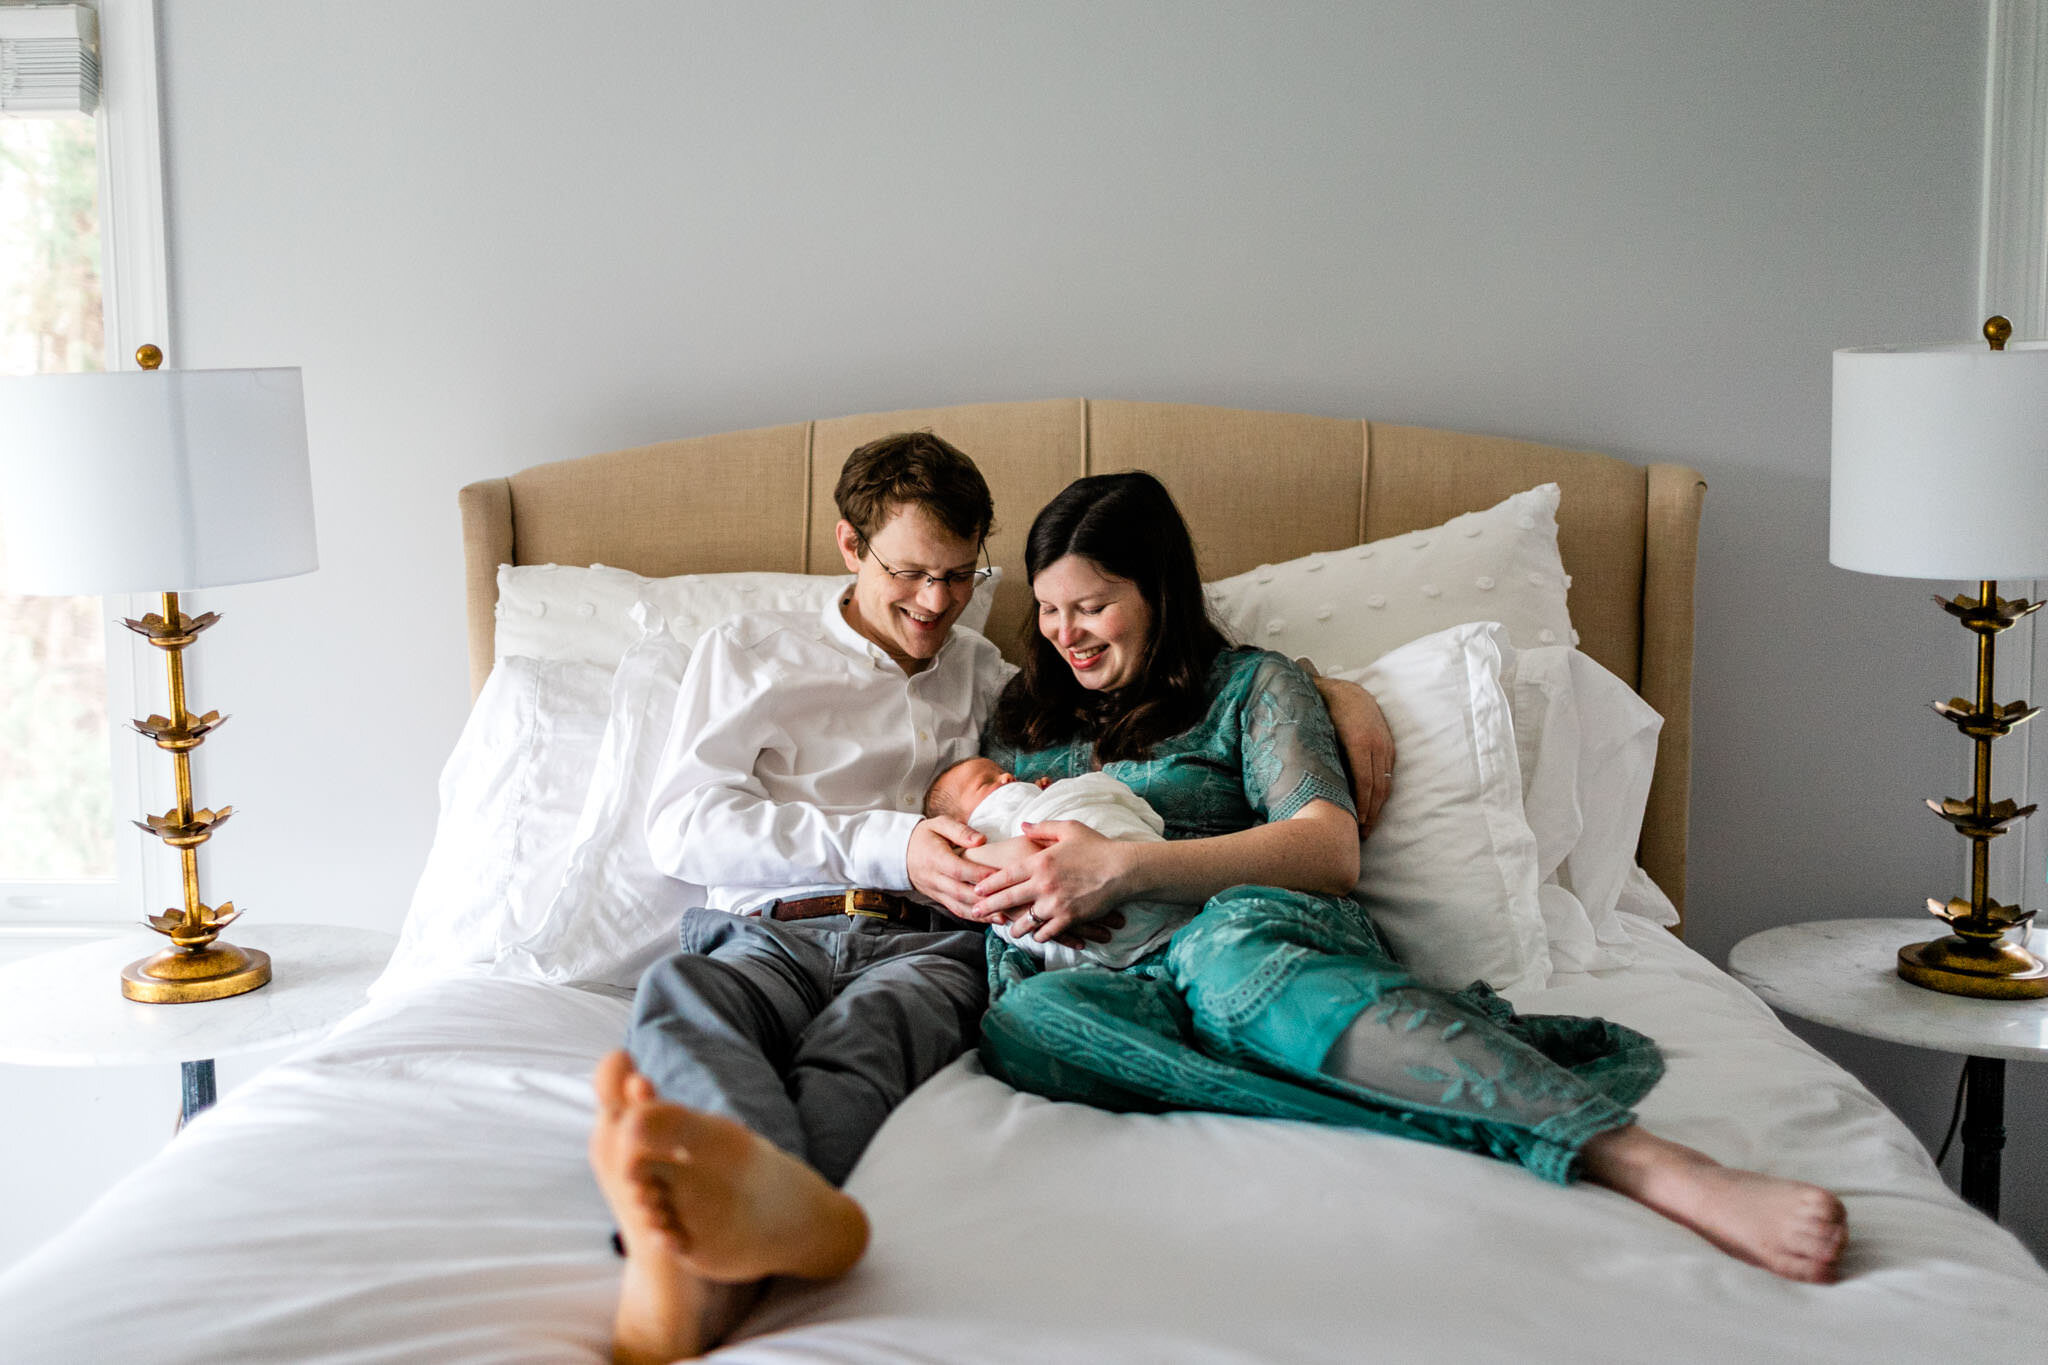 Durham Newborn Photographer | By G. Lin Photography | Man and woman holding baby and sitting on bed